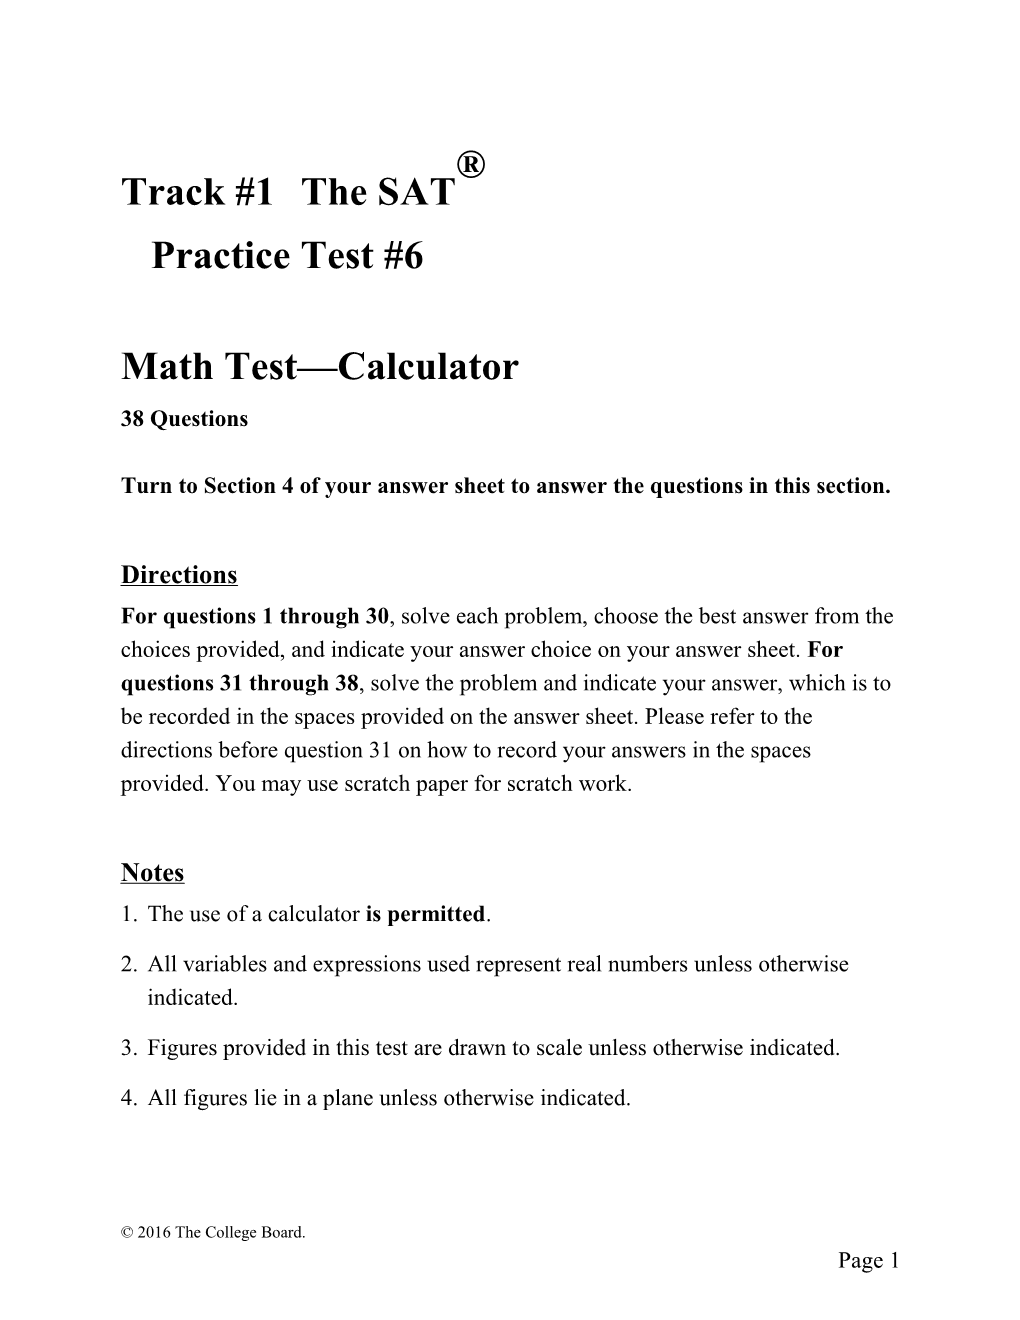 SAT Practice Test 6 for Assistive Technology Math Test, Calculator SAT Suite of Assessments